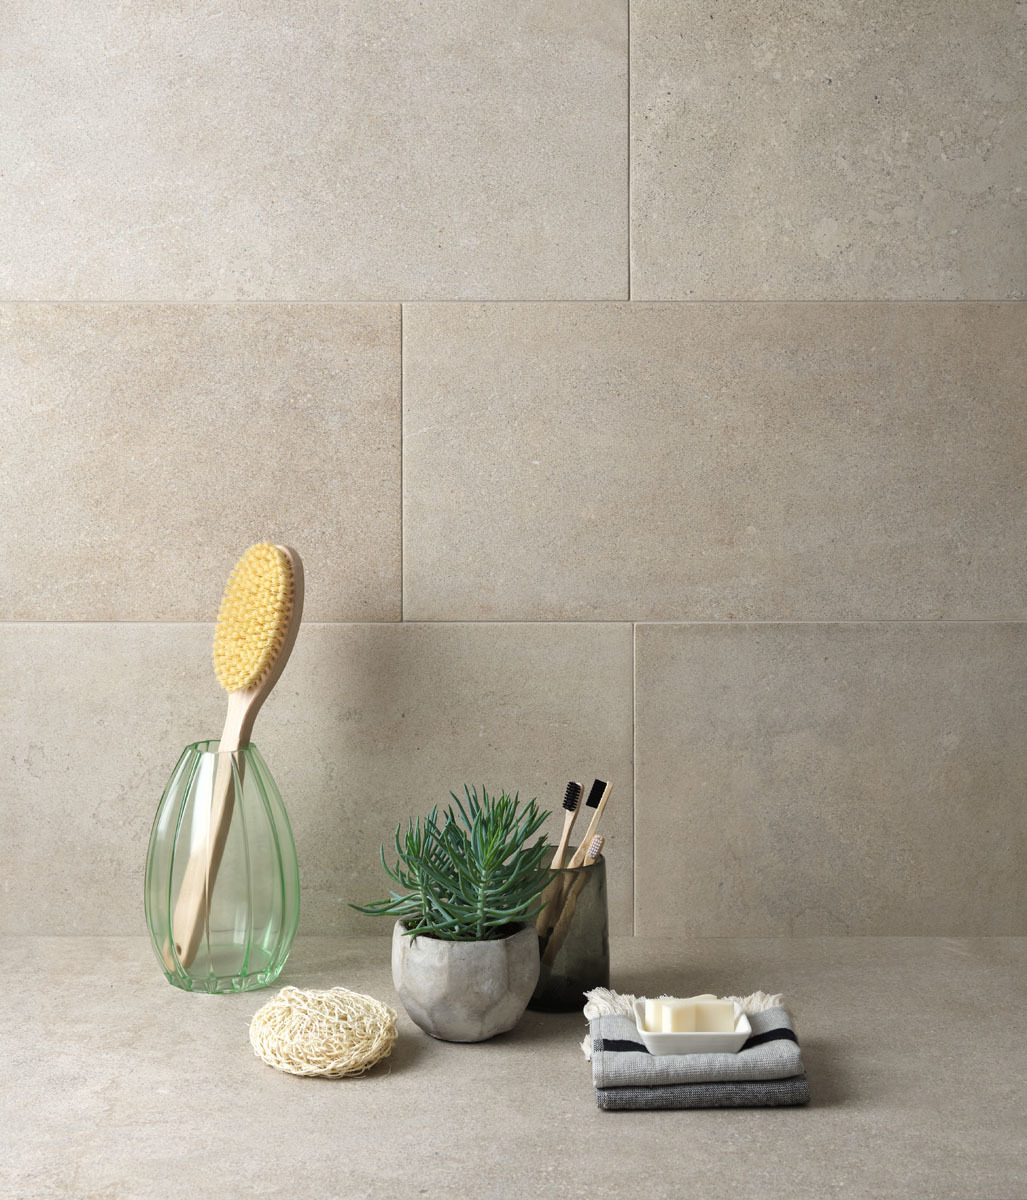 Ochre Natural Small Rectangle, product variant image